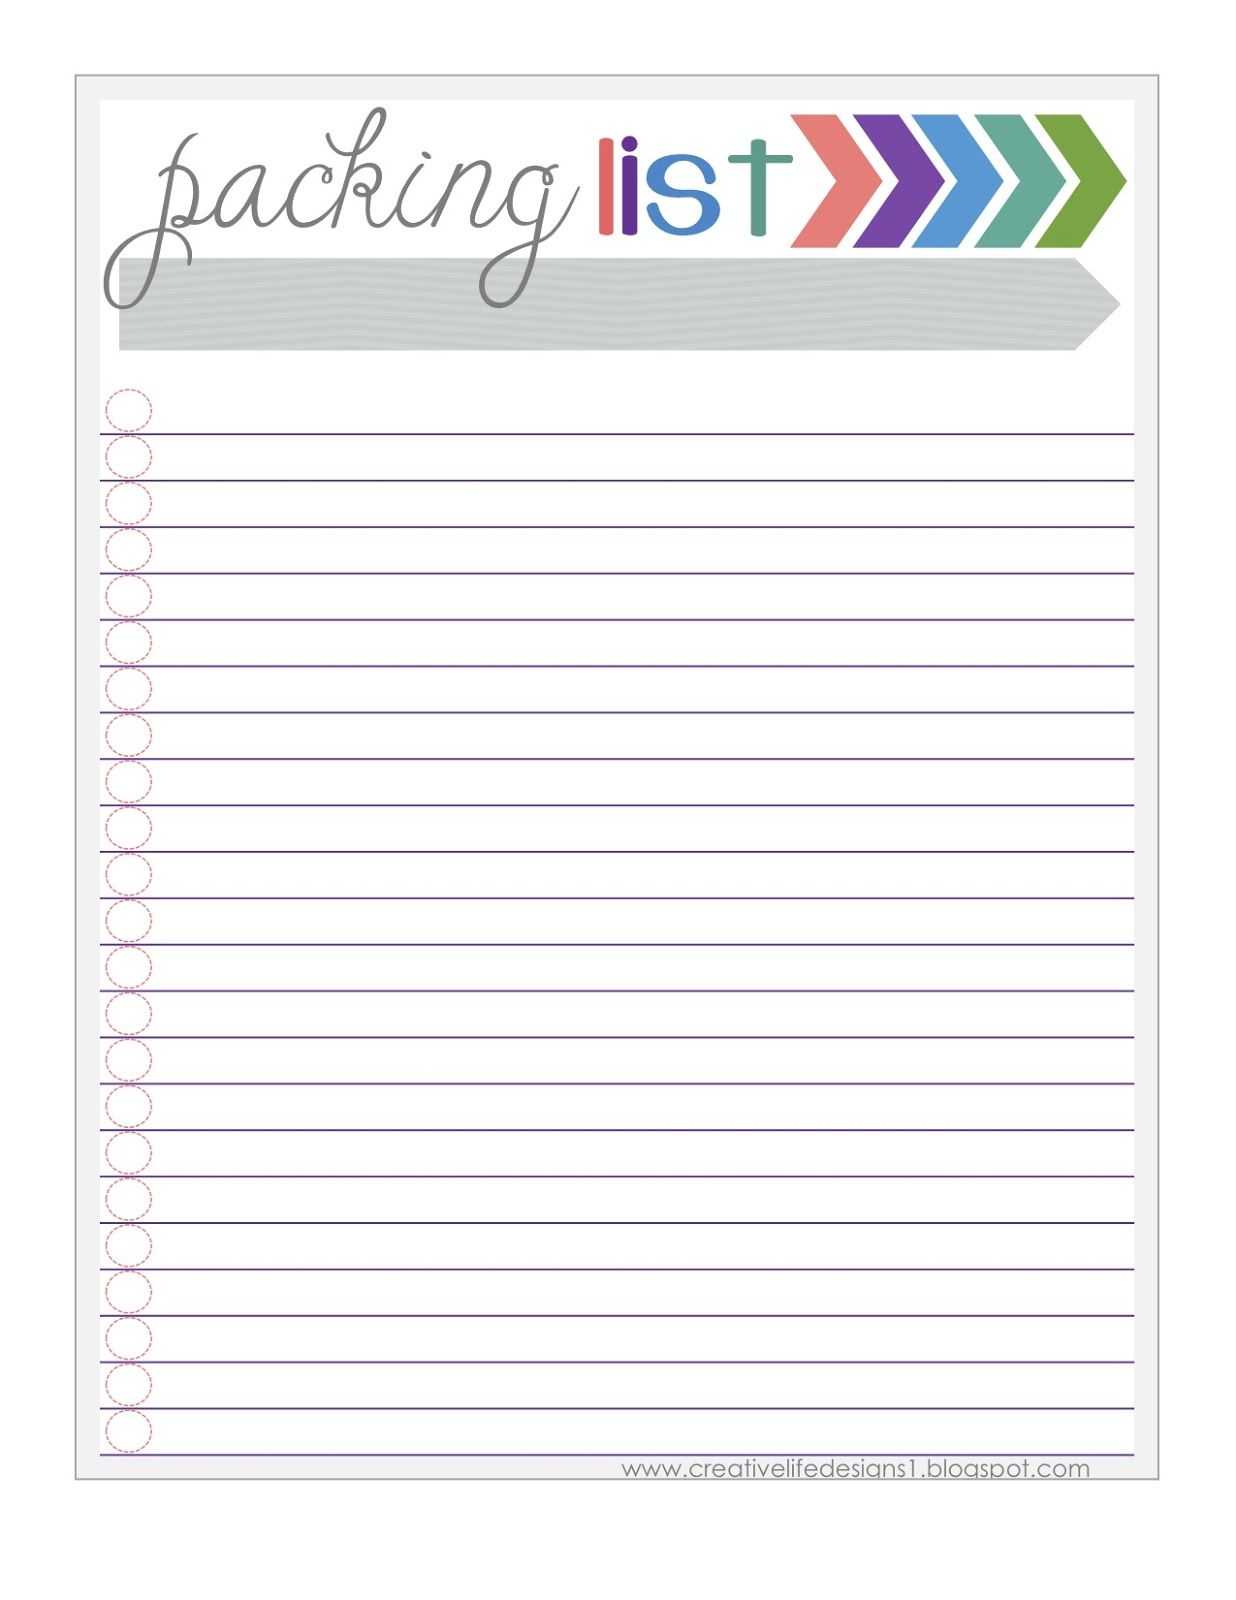 Free Packing List Printable Creative Life Designs | Packing Throughout Blank Packing List Template